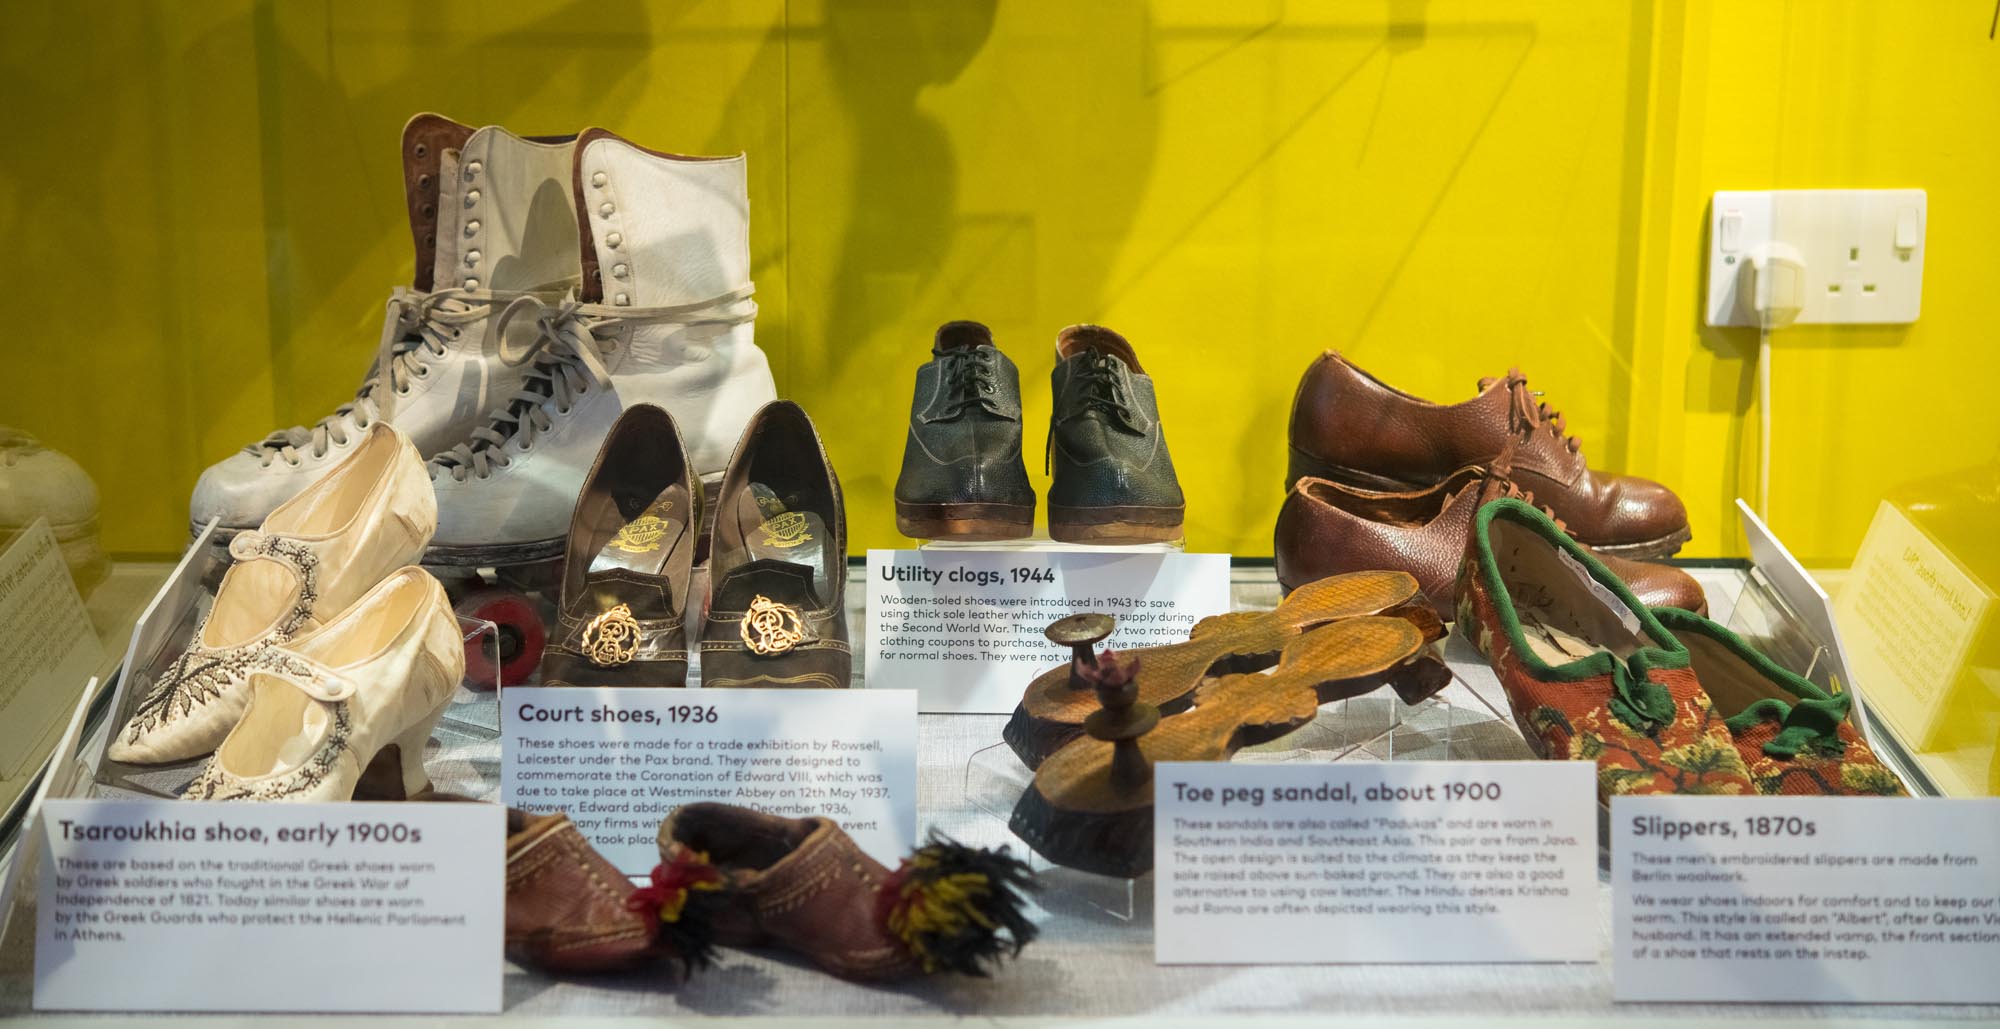 Various historical shoes on display in the exhibition